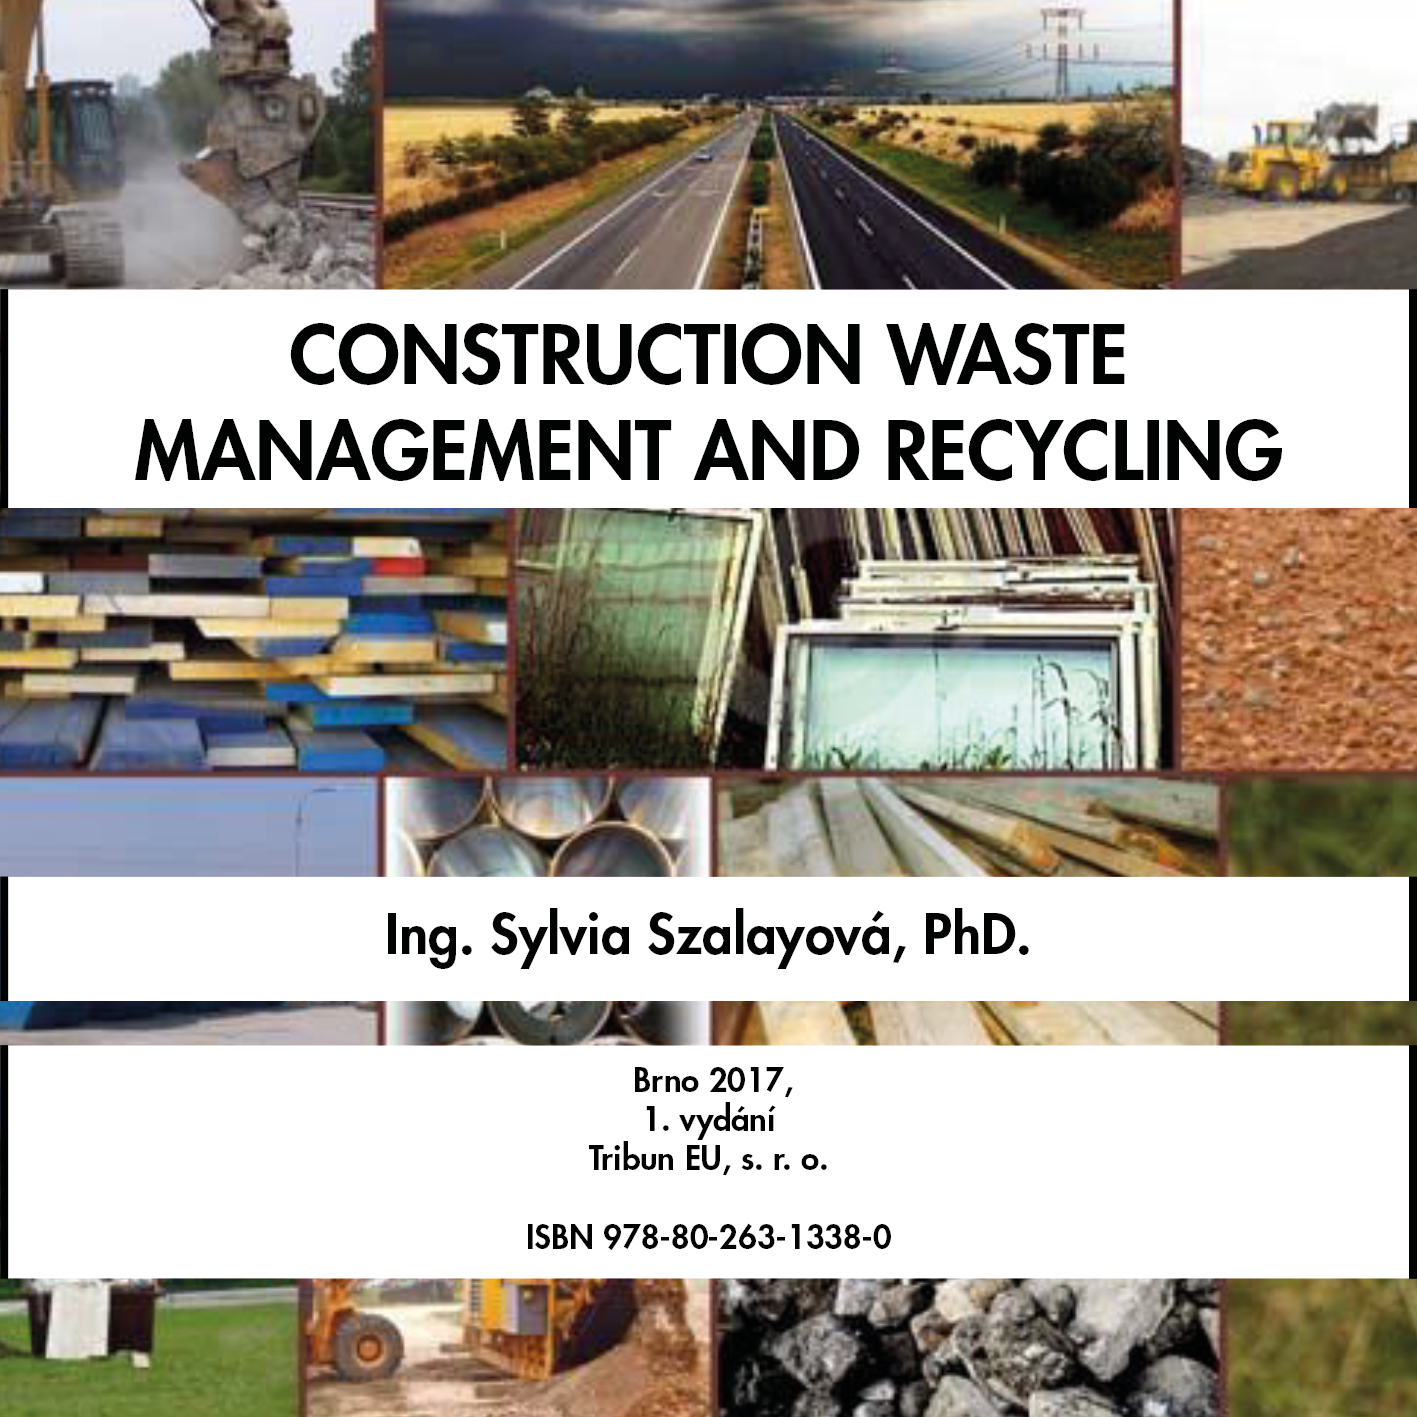 Construction waste management and recycling